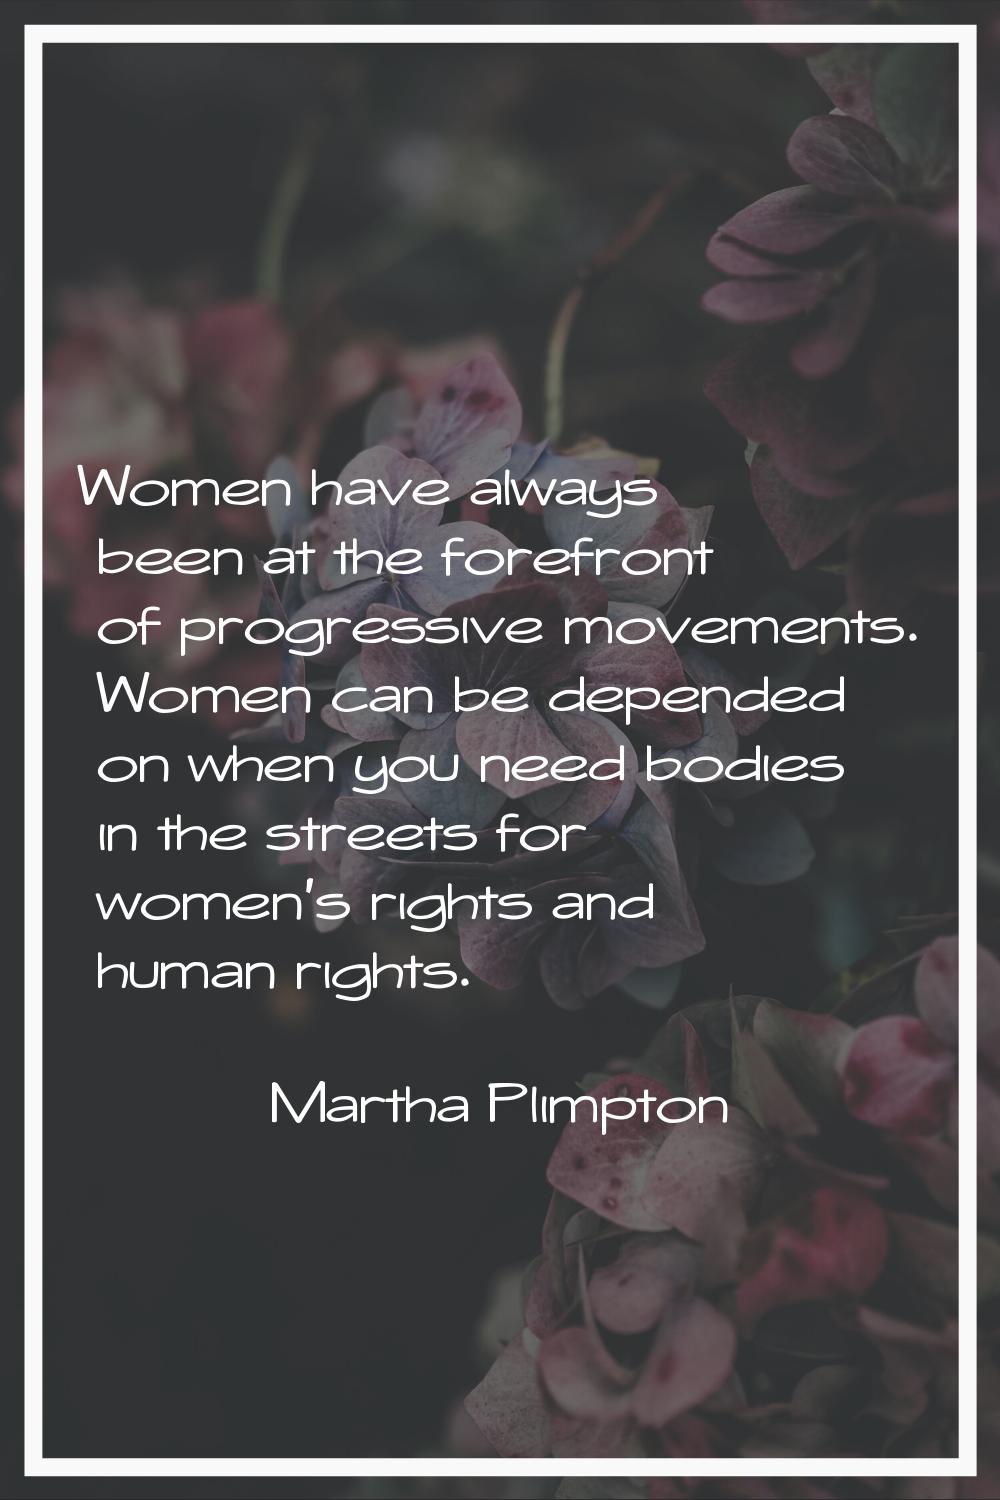 Women have always been at the forefront of progressive movements. Women can be depended on when you